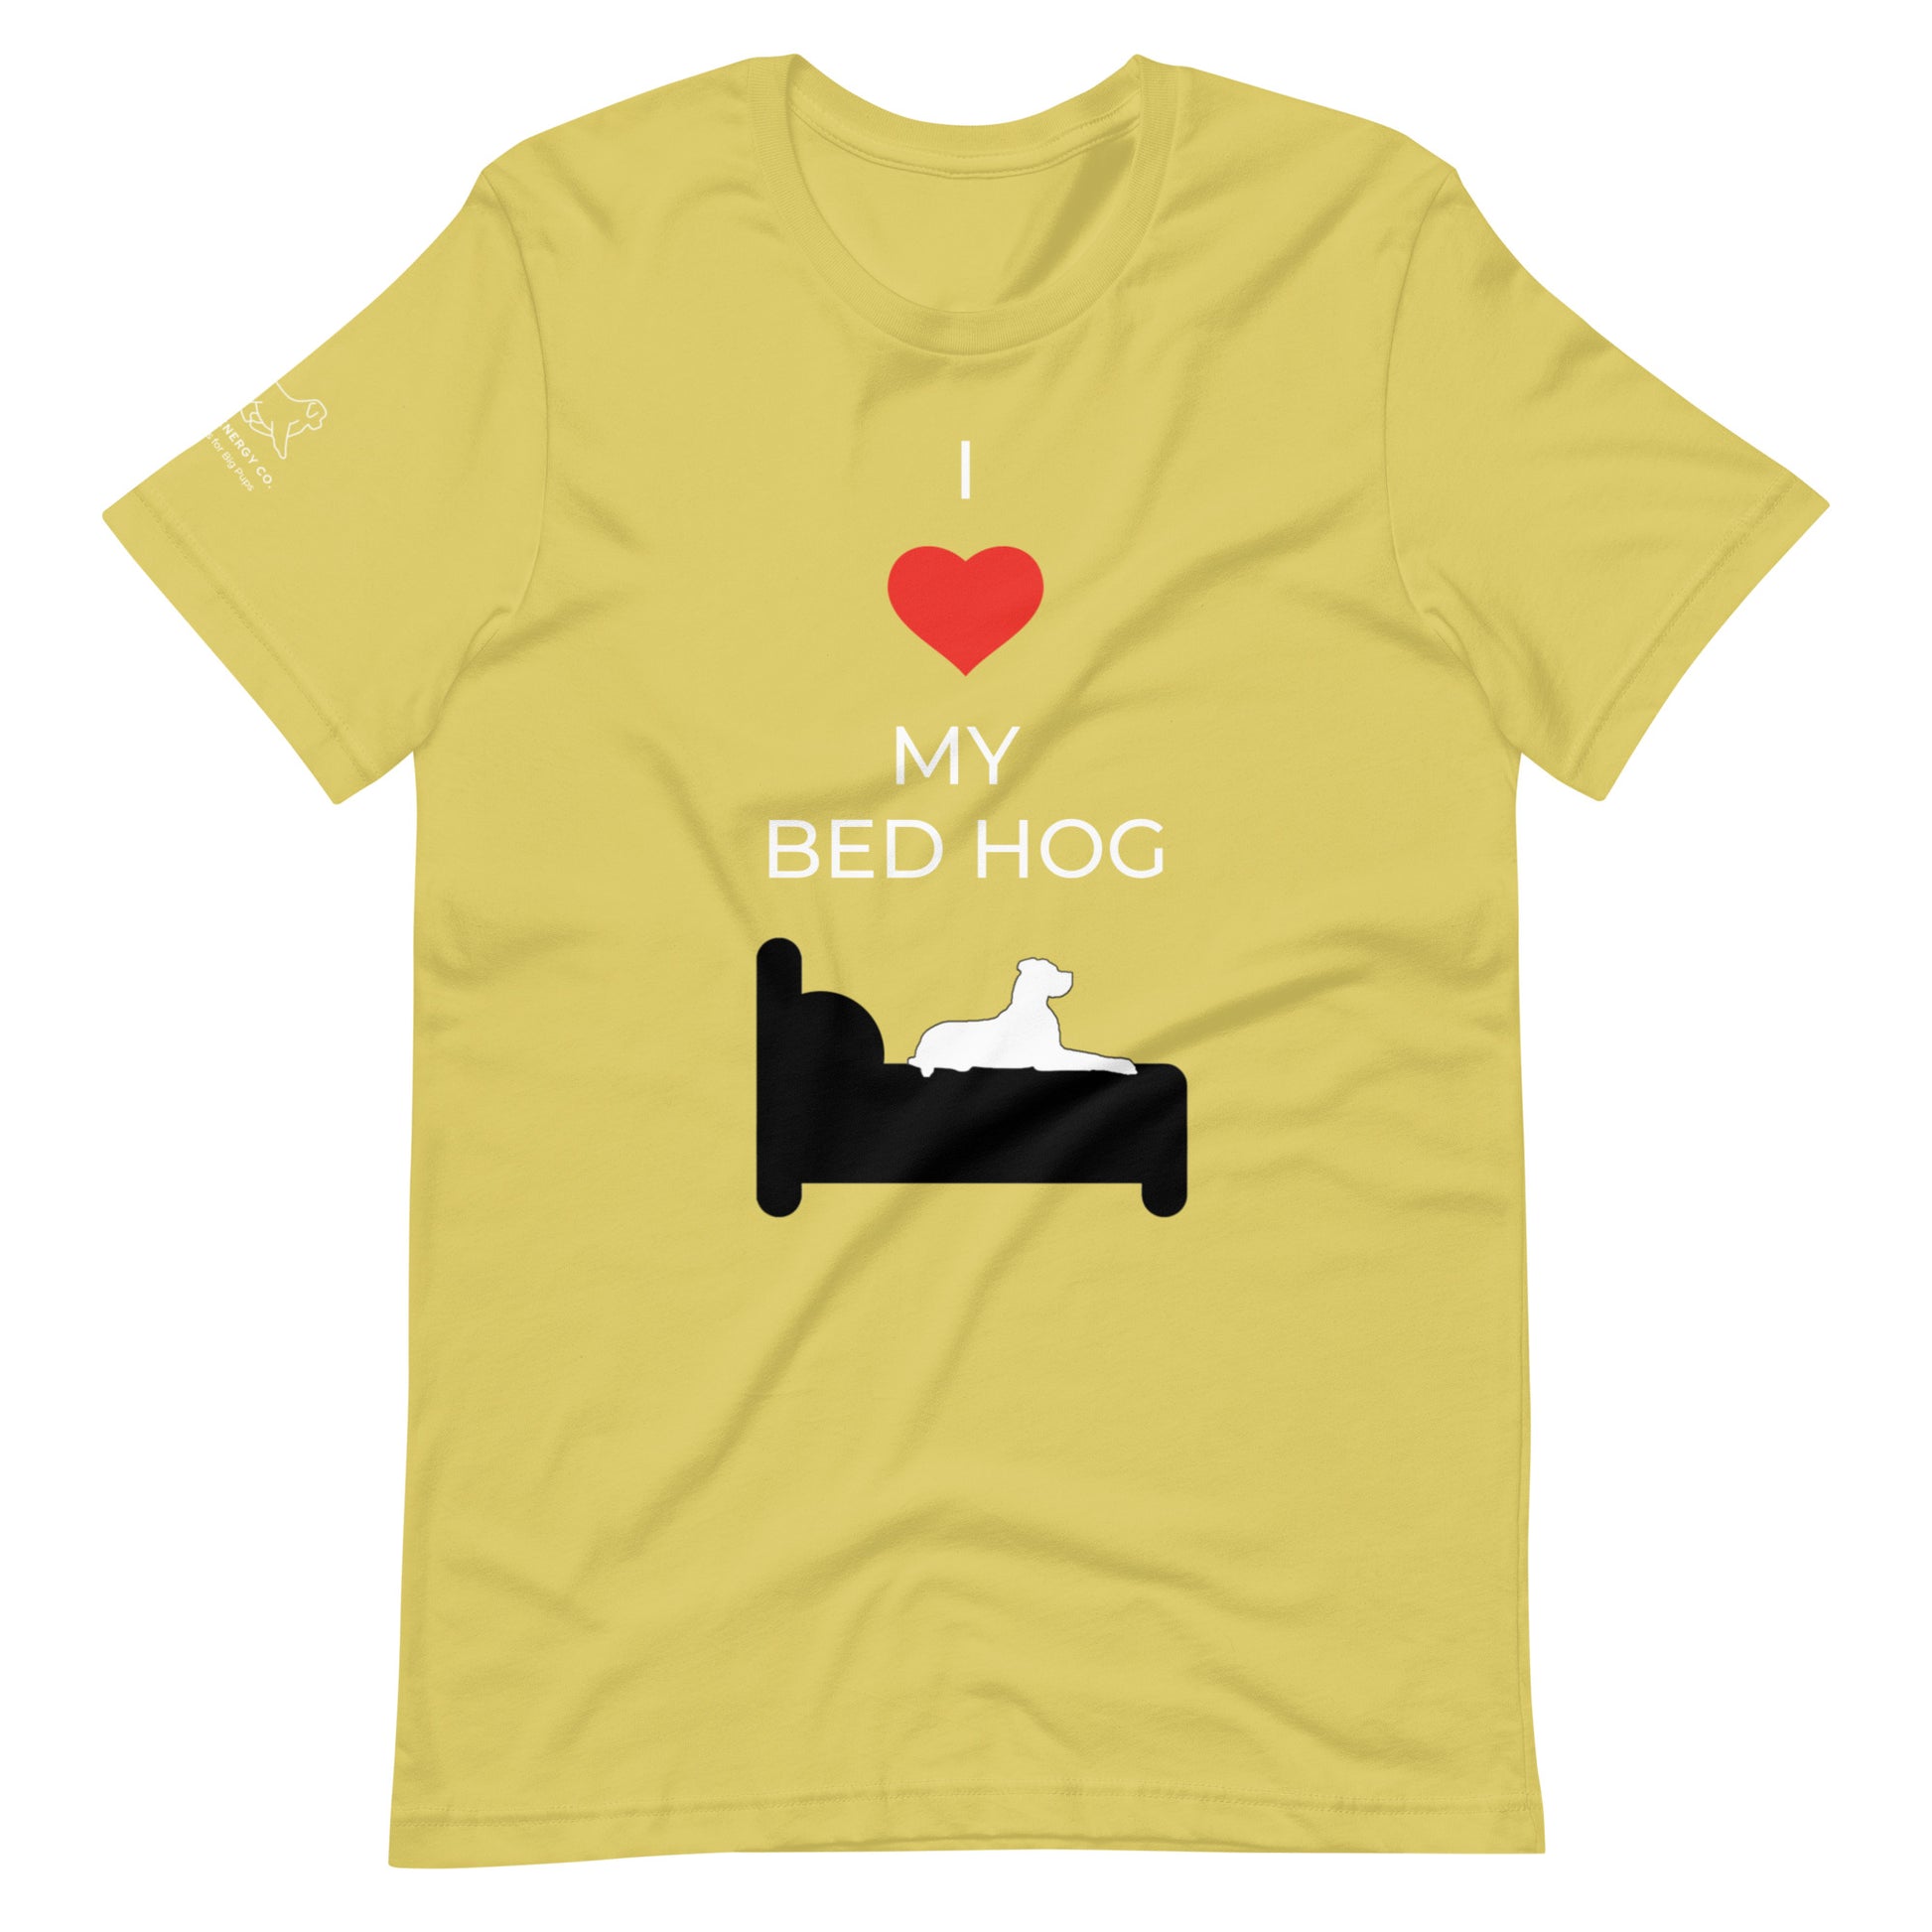 Front of a strobe green/yellow t-shirt that reads "I love my bed hog" in white text over an illustration that is the white silhouette of a large dog laying on the dark silhouette of a bed. The word "love" is replaced by a red heart symbol.